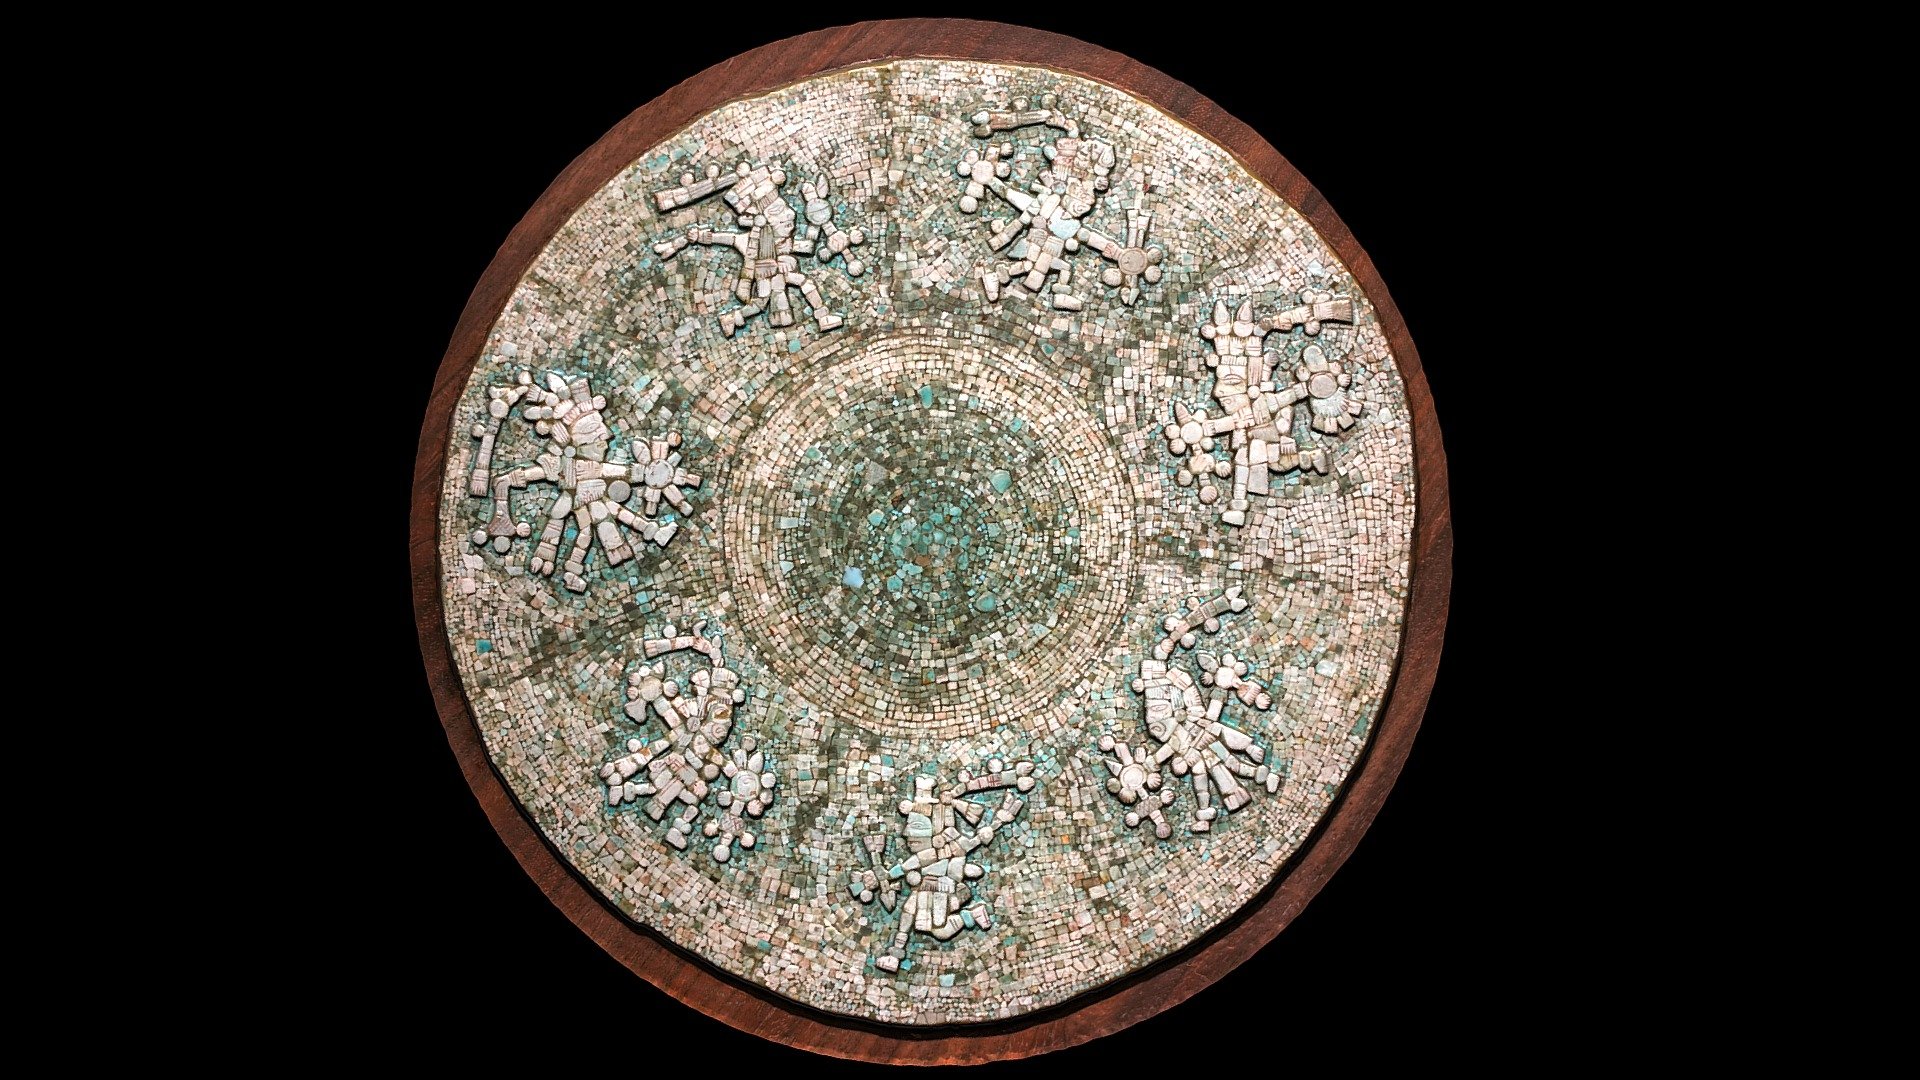 Mexica, Templo Mayor, Phase VII, Offering 99, 1502-1520 C.E. Golden Kingdoms: Luxury Arts in the Ancient Americas, The Metropolitan Museum of Art. Catalog number 219. https://www.metmuseum.org/exhibitions/listings/2018/golden-kingdoms - Mosaic Disc - 3D model by Alexandre Tokovinine (@tokovinin3d) 3d model